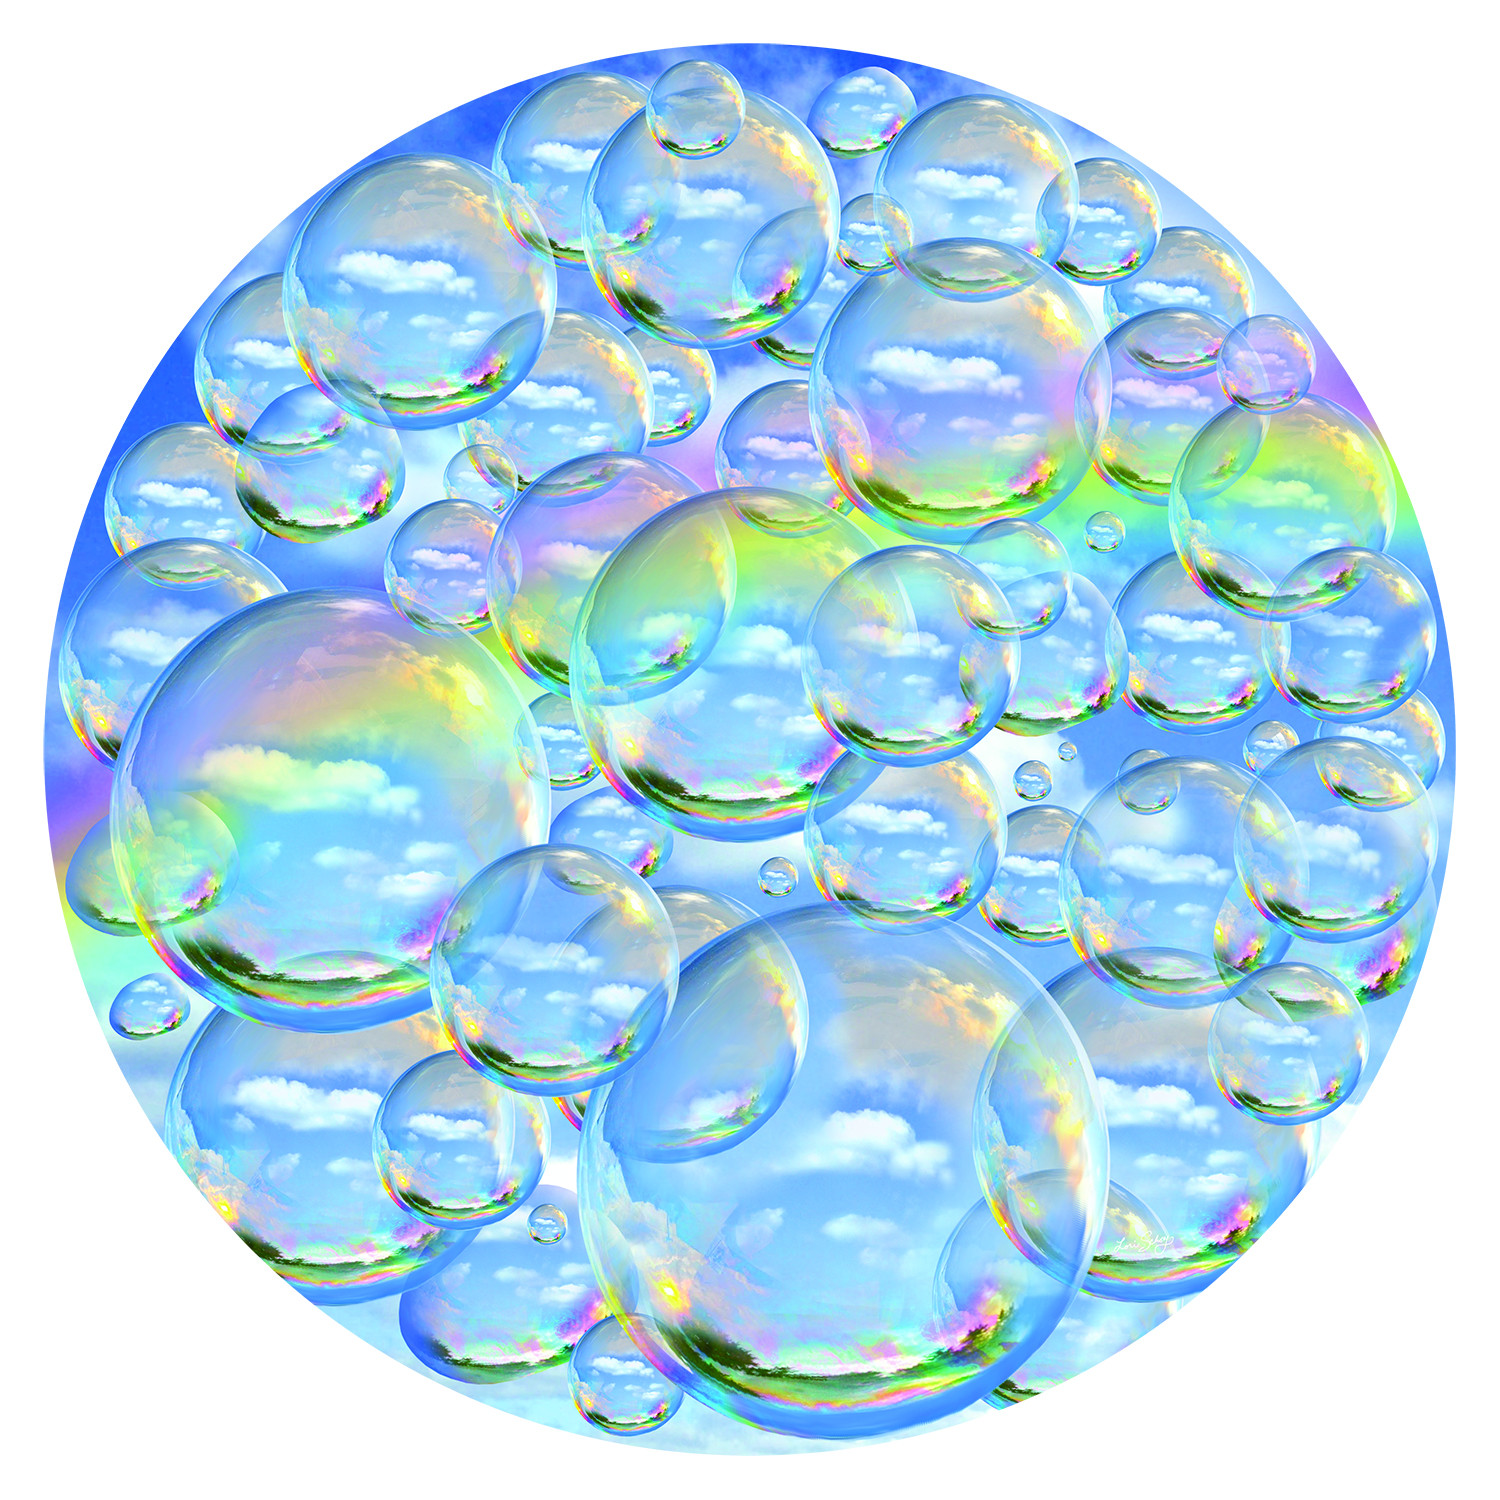 Bubble Trouble Everyday Objects Shaped Puzzle